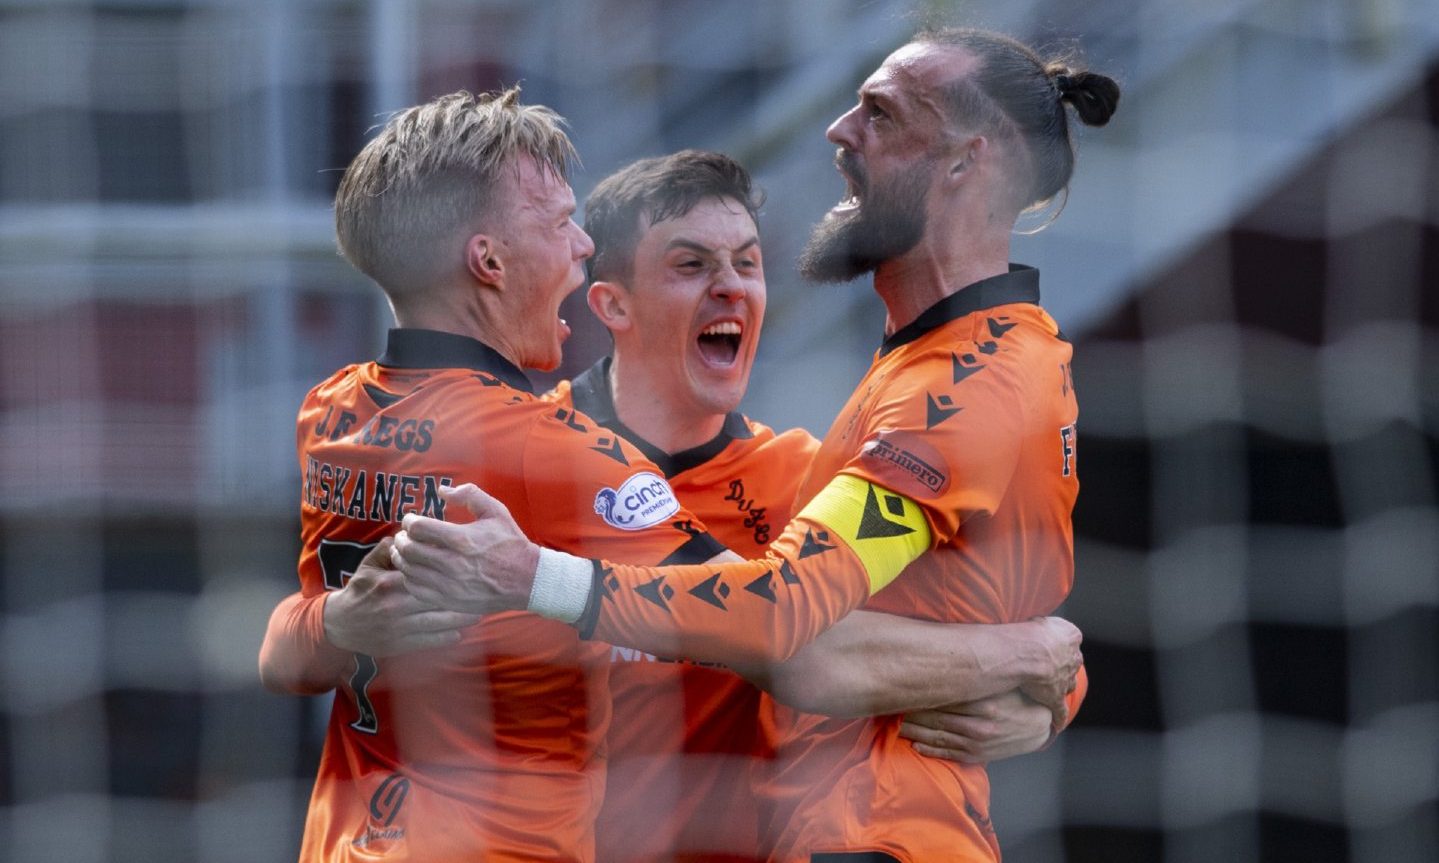 Dundee United players celebrate the late winner at the game at which the banned teenager was spotted. Image: SNS.